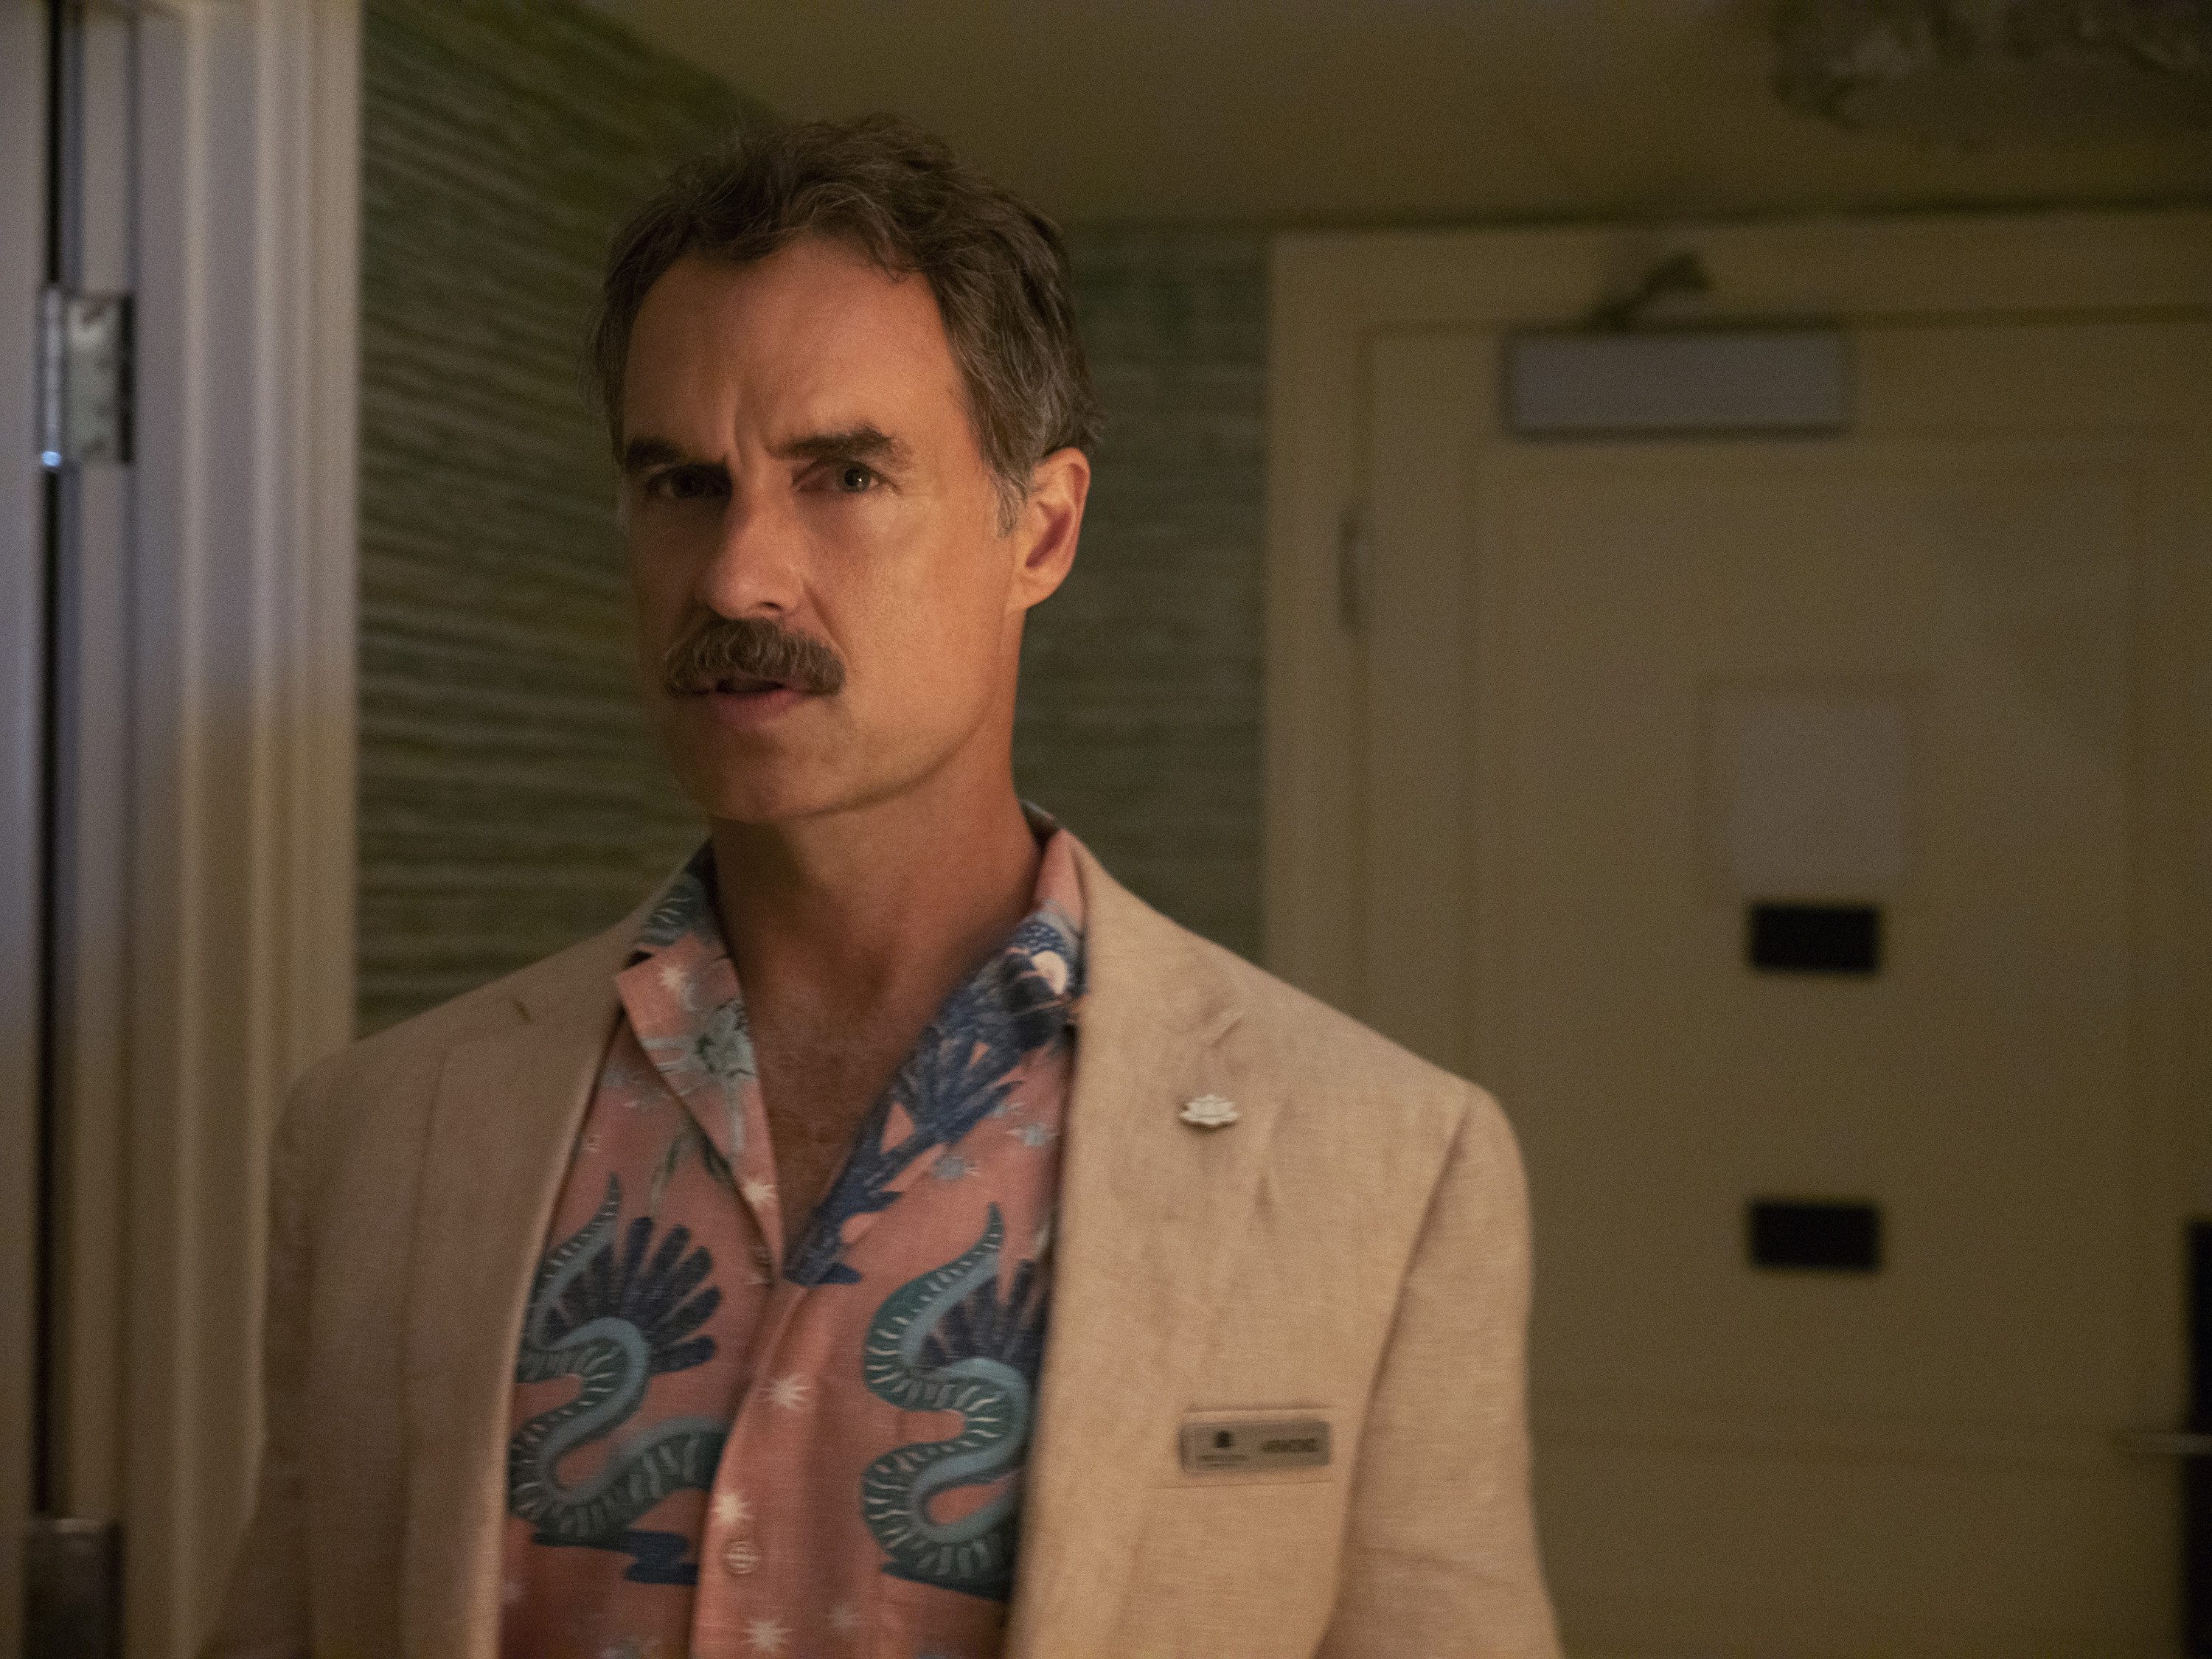 The White Lotus Cast on HBO - Murray Bartlett as Armond